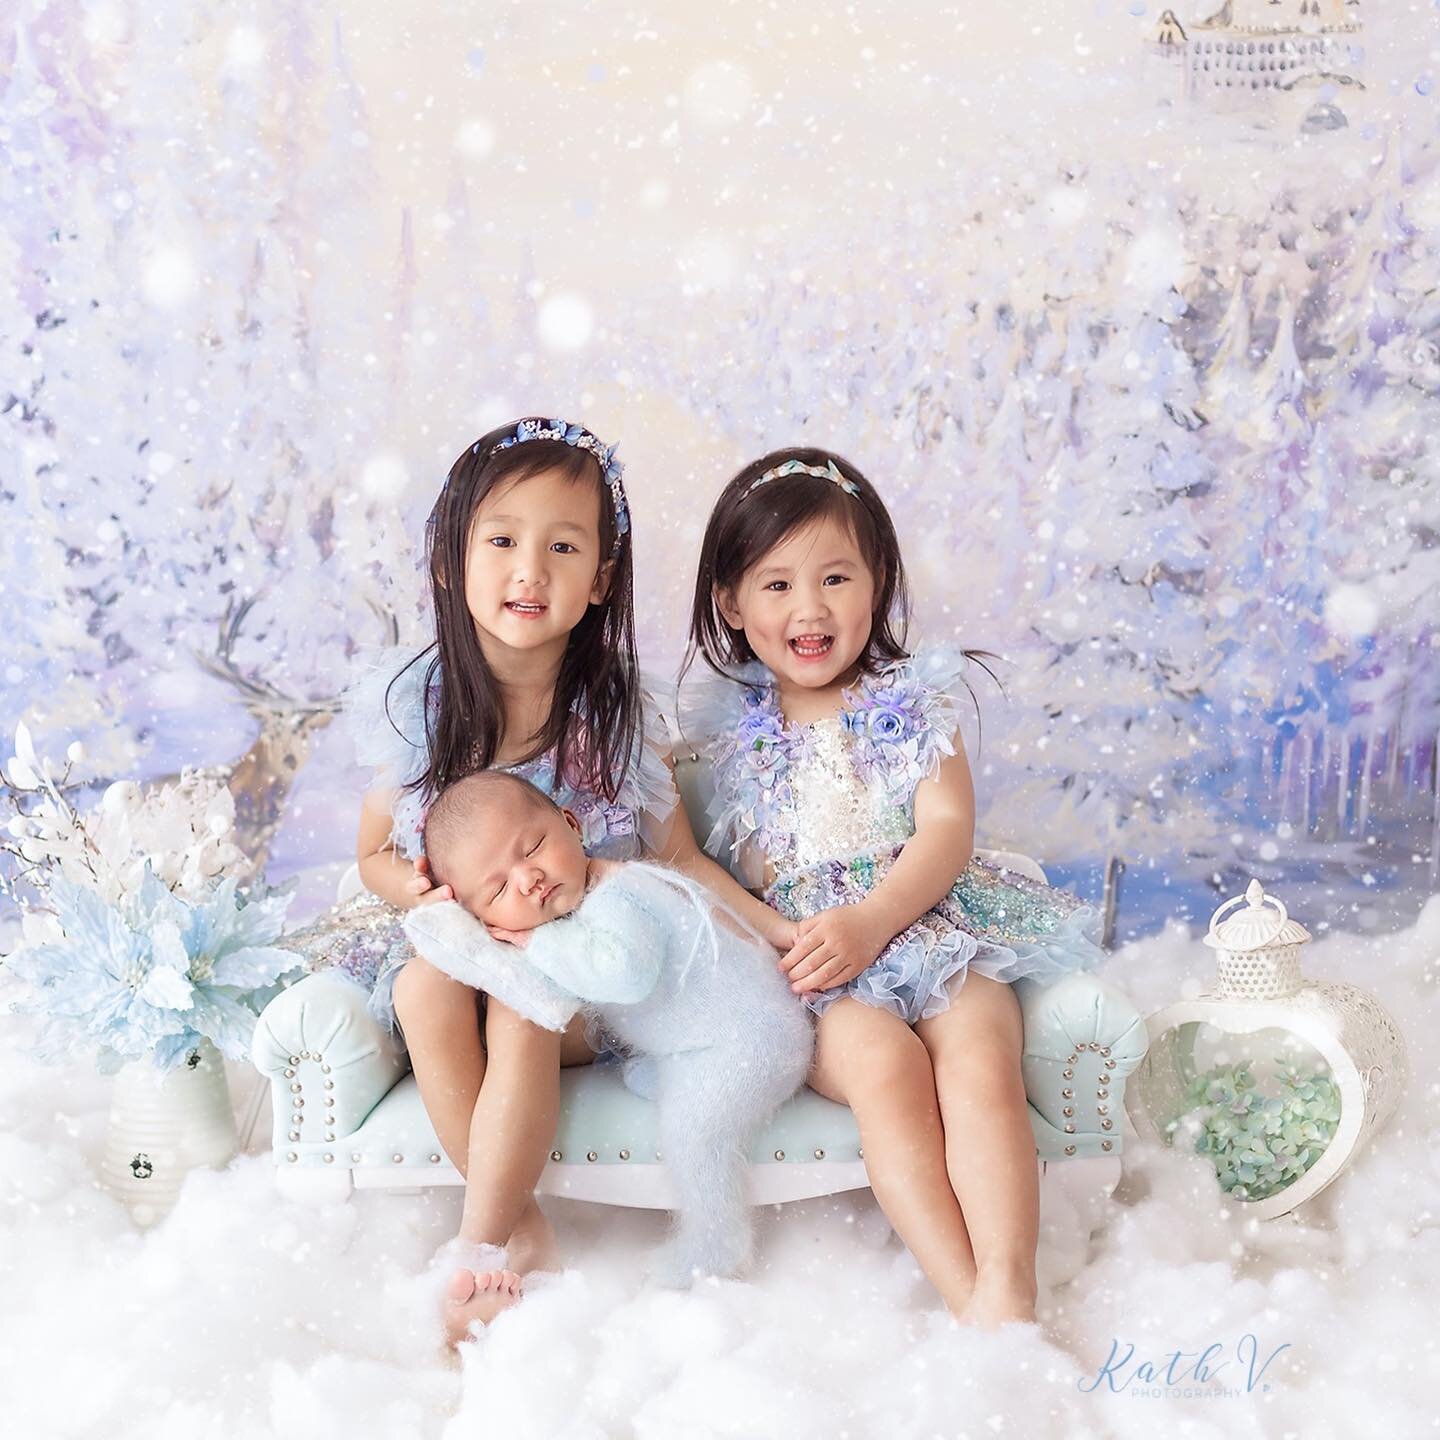 Sibling portraits can be a challenge especially with young children but these beautiful sisters adore their brother! Getting the shot was no challenge at all ☺️

Proud big sisters Leyla (4), Lyanna (3) and their brother Logan (3 weeks)

🌐 www.kathv.